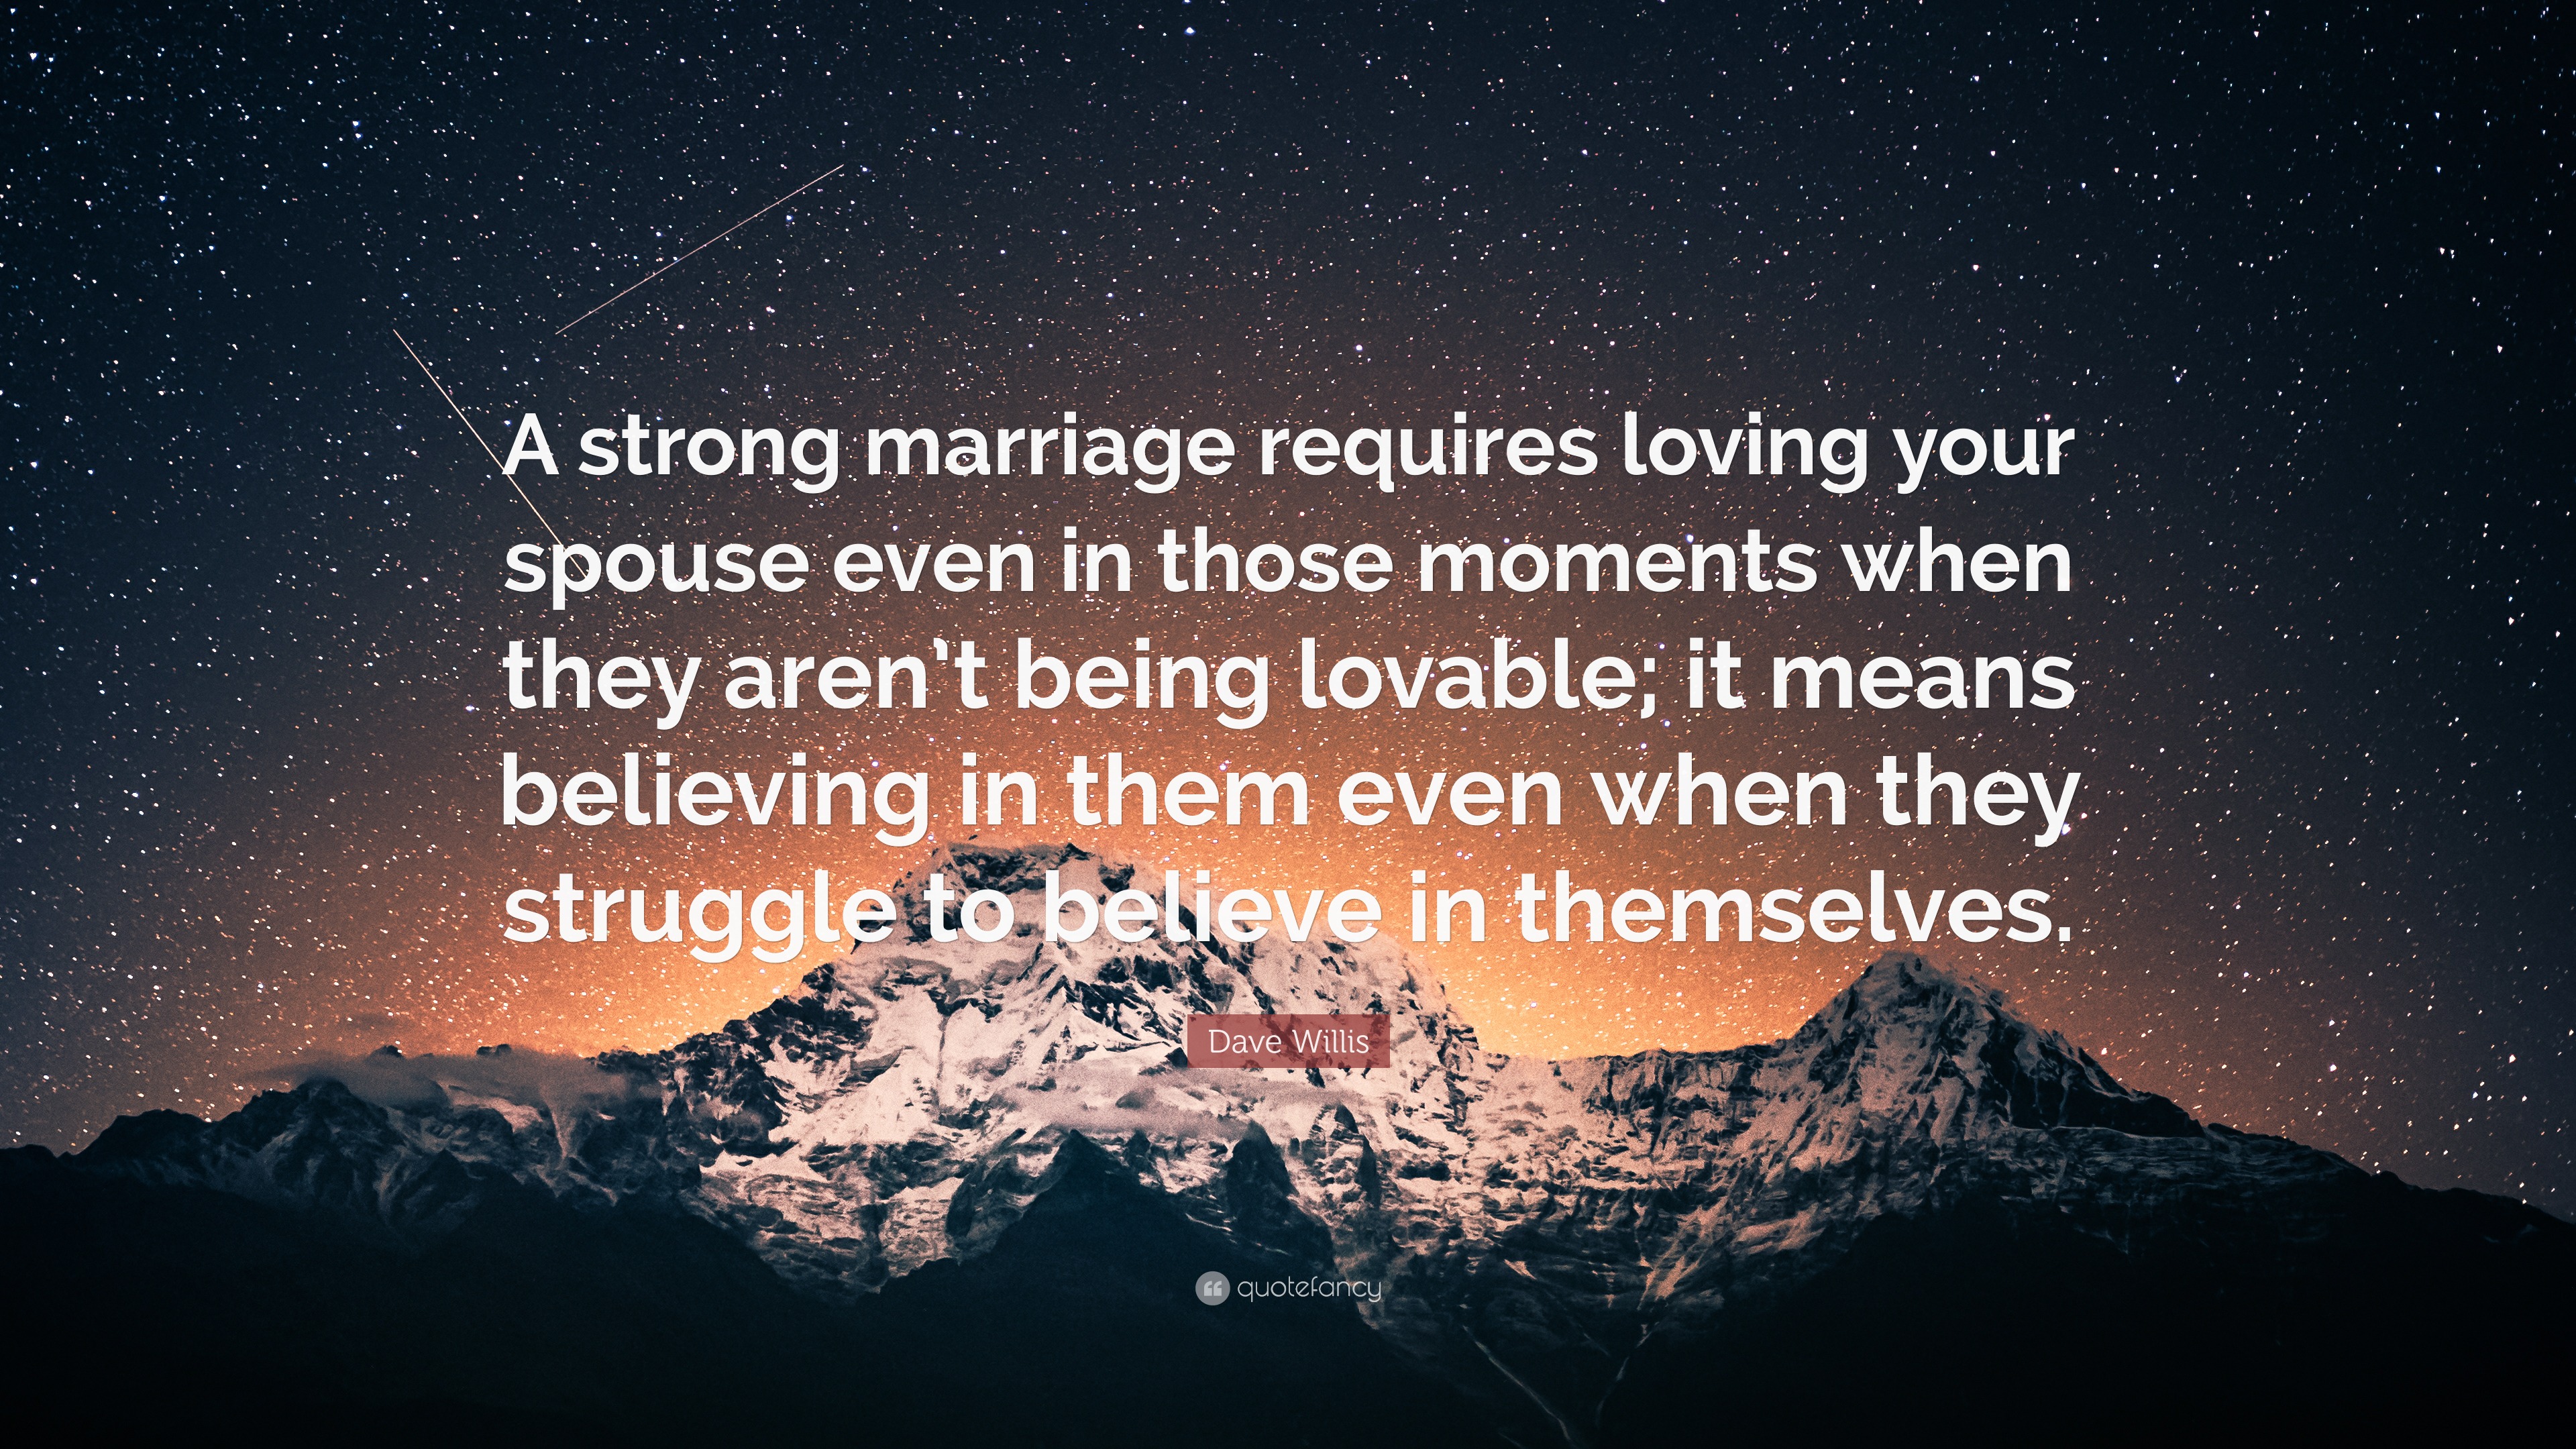 Dave Willis Quote: “A strong marriage requires loving your spouse even ...